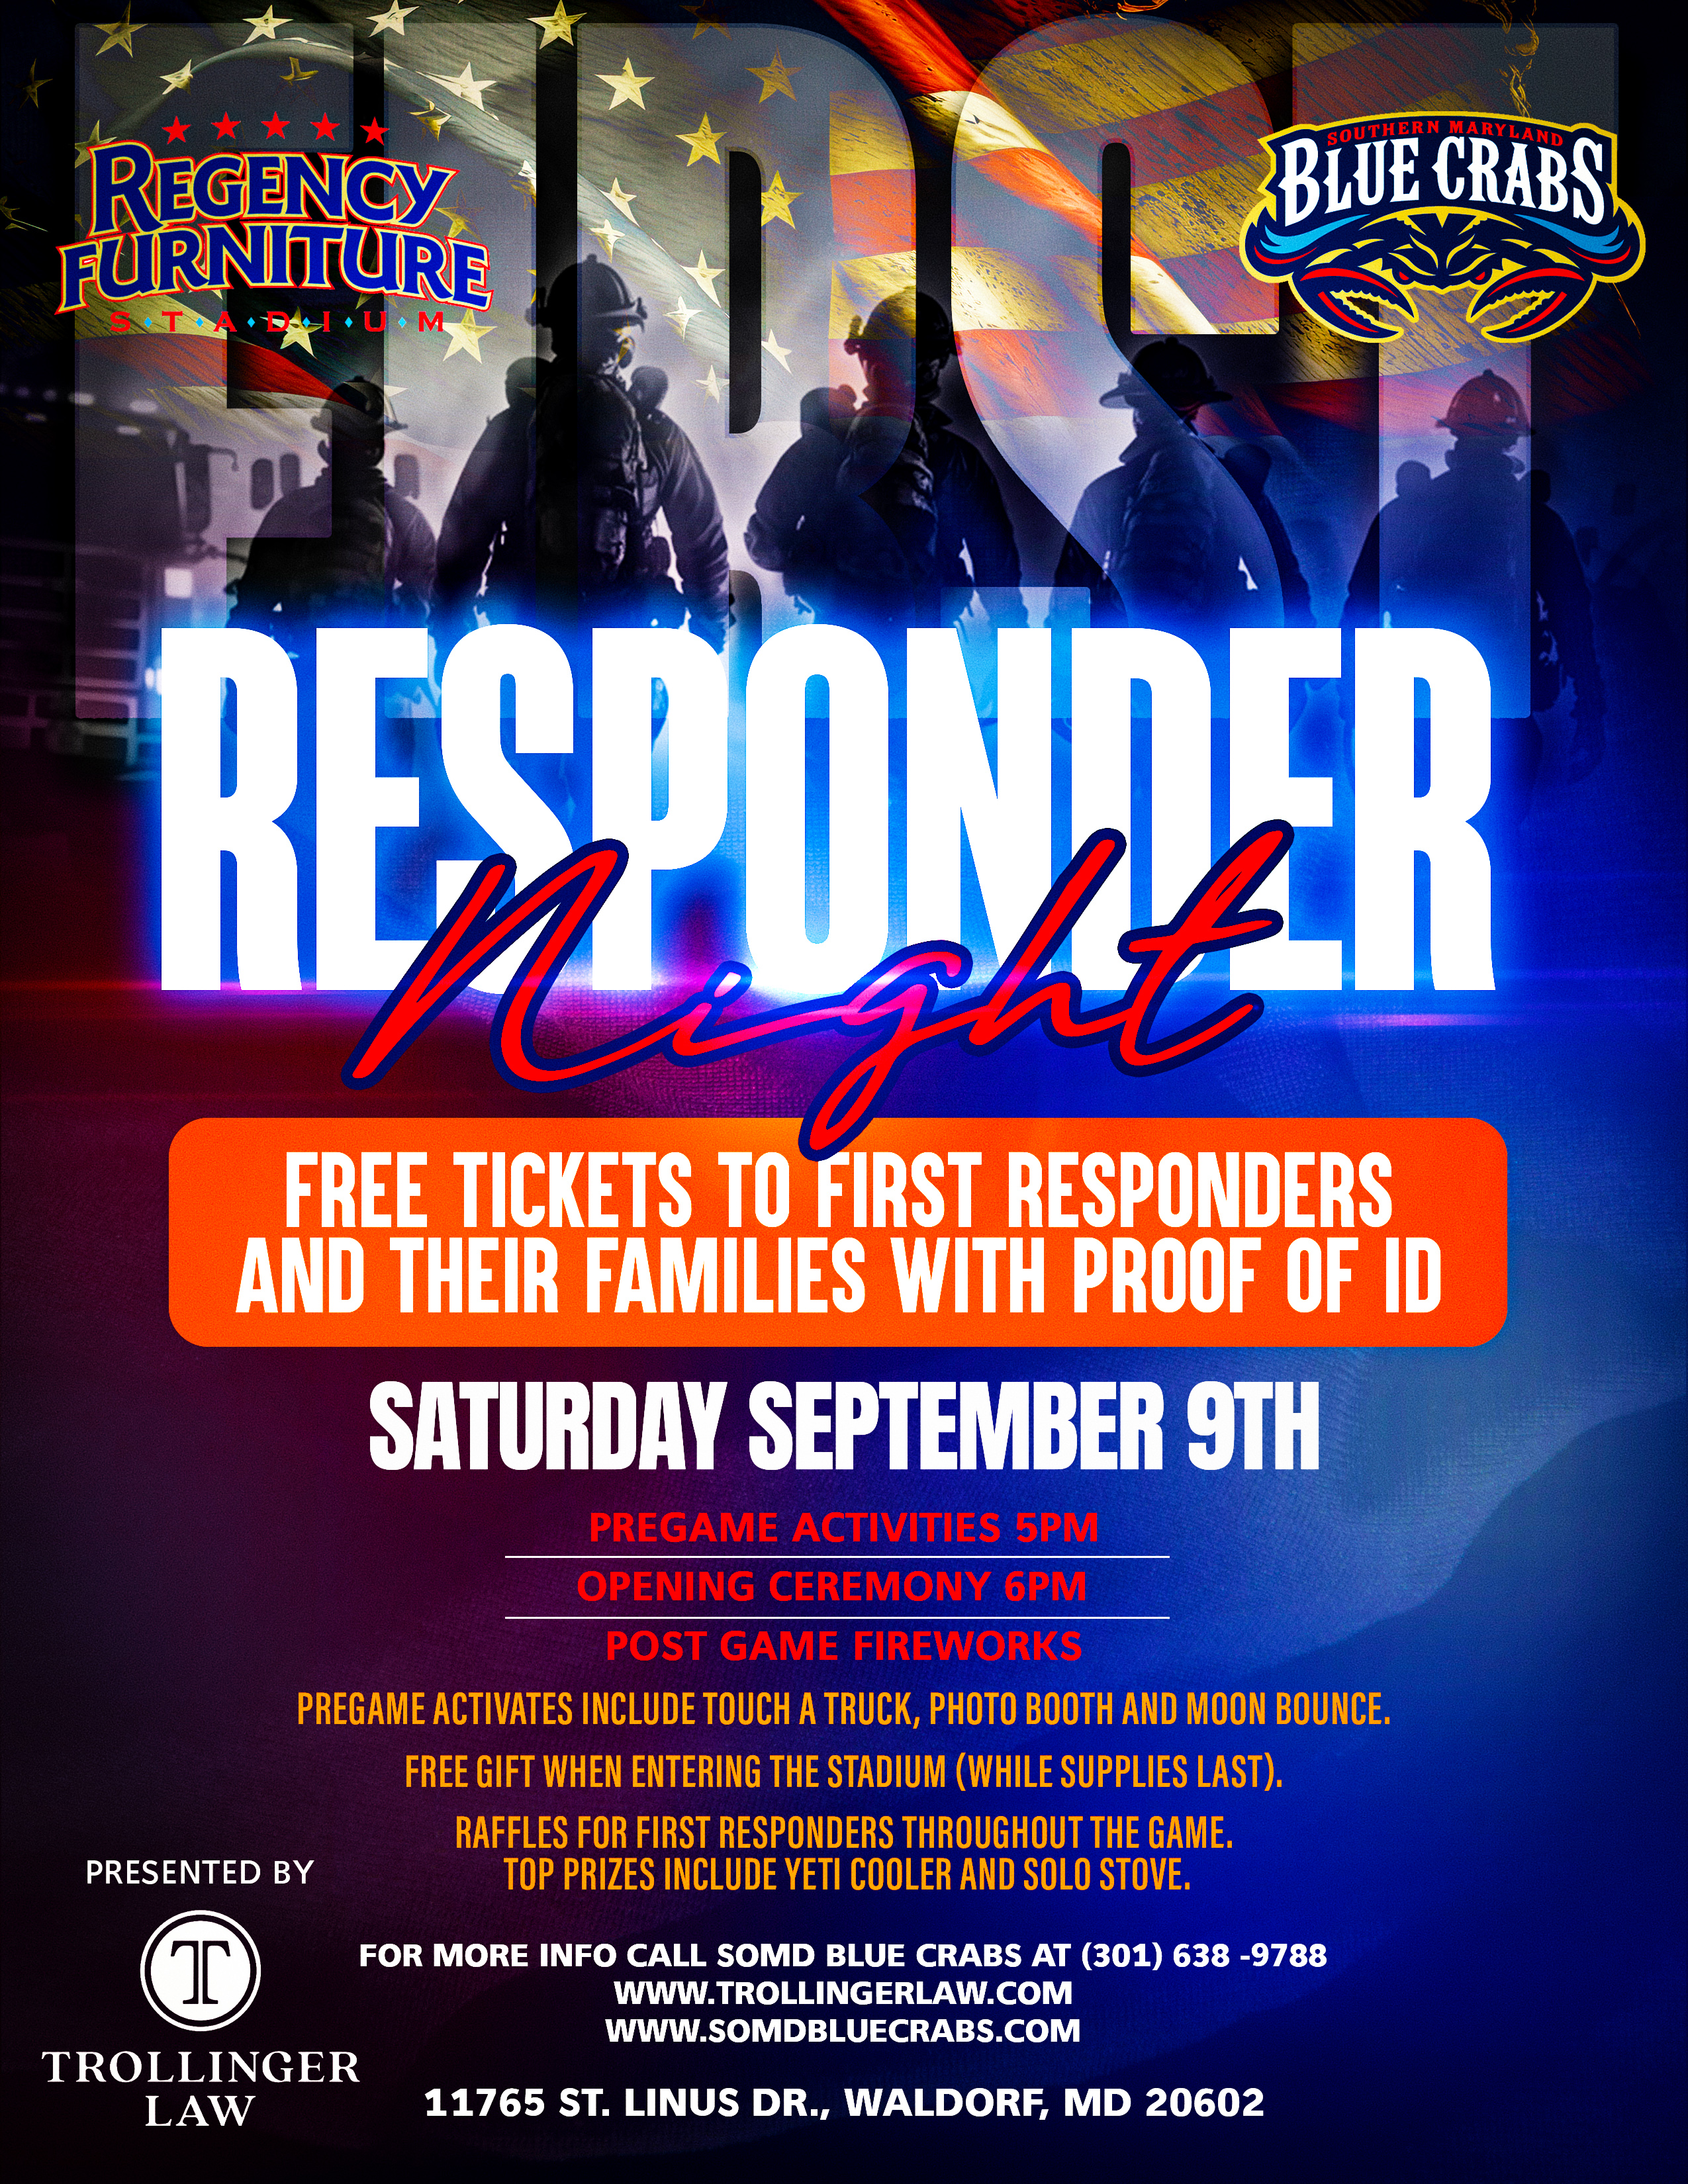 First Responders Night presented by Trollinger Law! Postgame Fireworks!